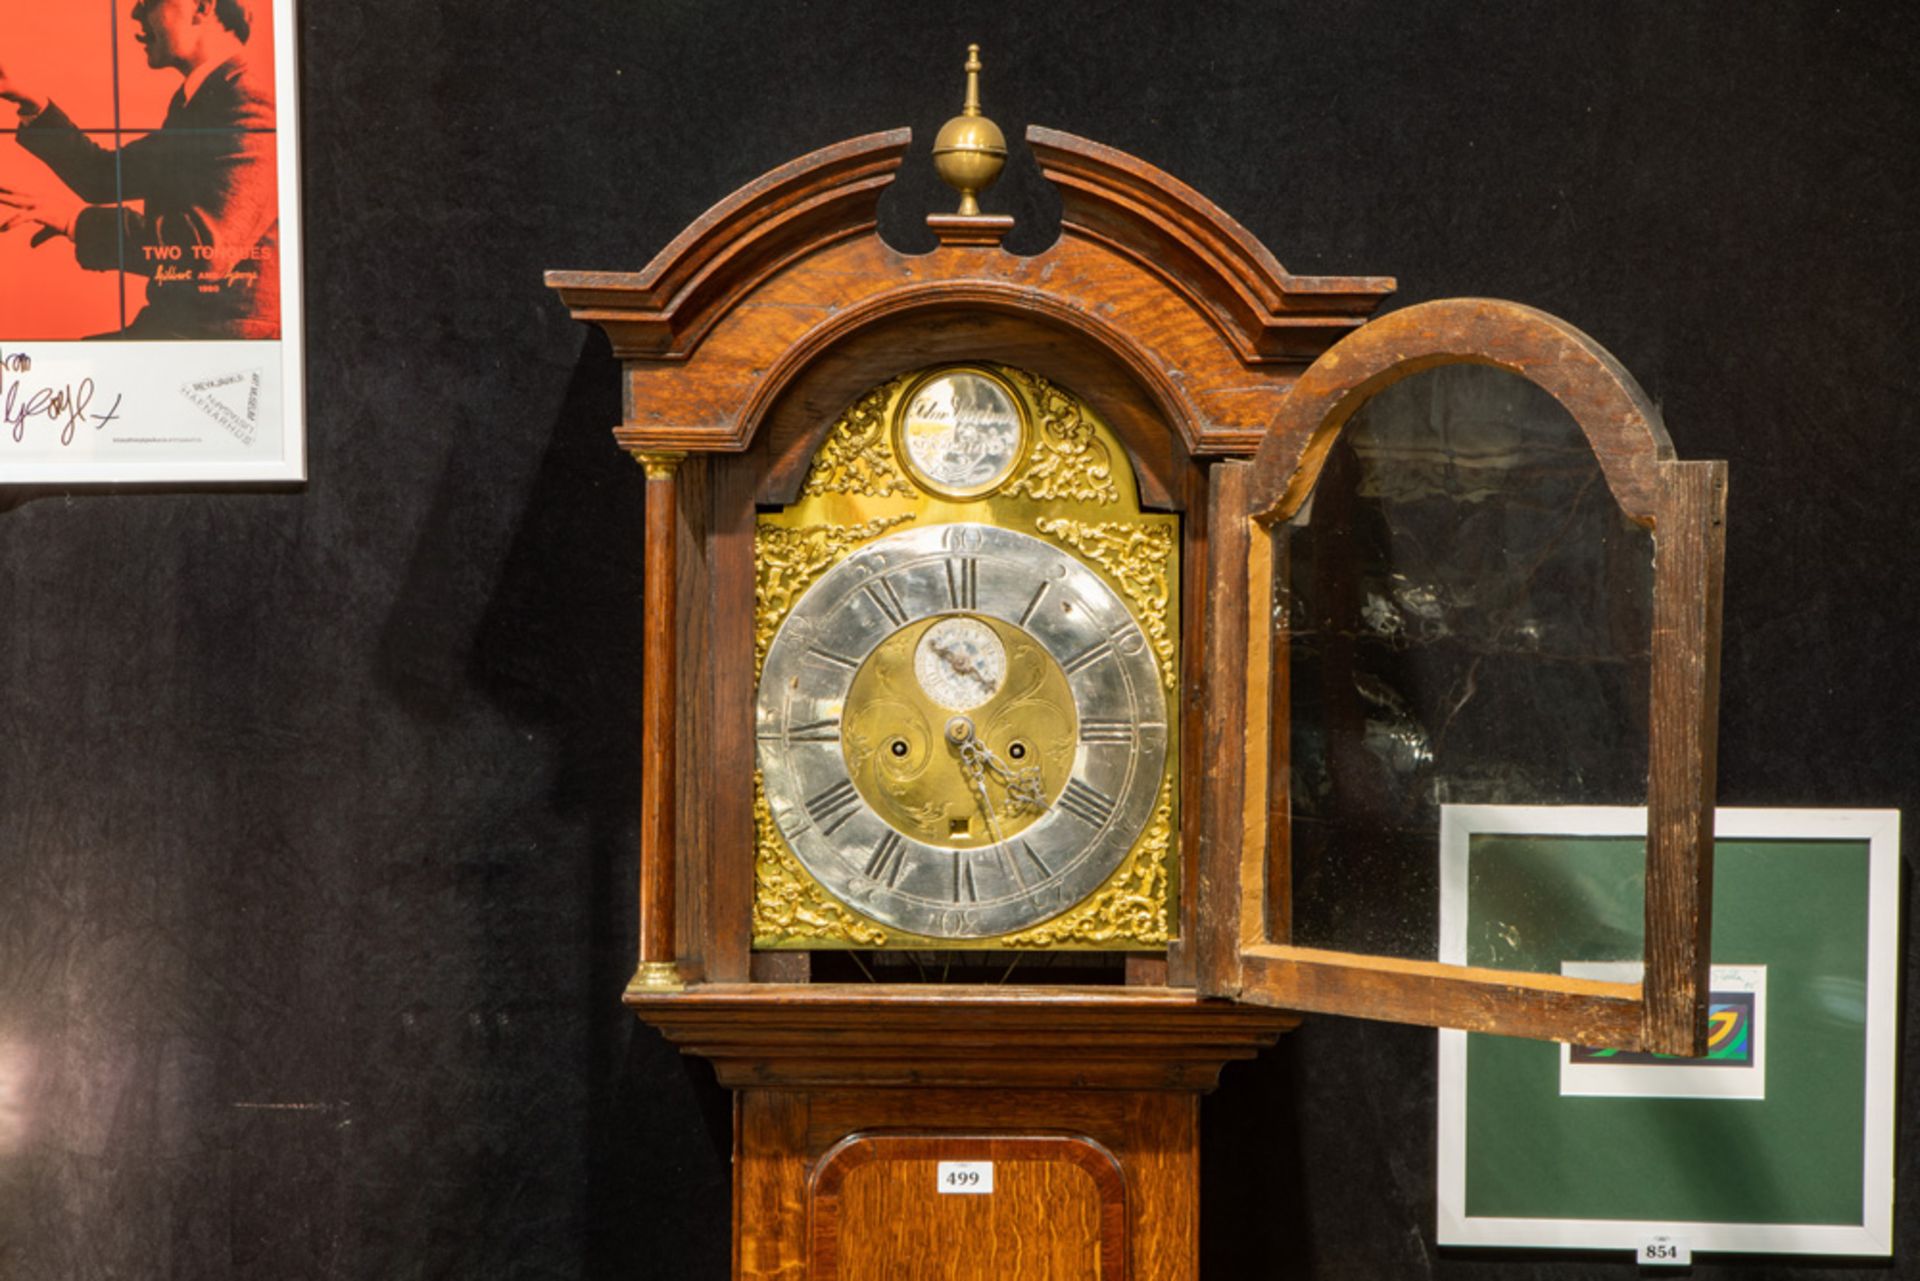 antique English longcase clock with case in oak and mahogany and with a "John ... - Sunderland" - Image 3 of 3